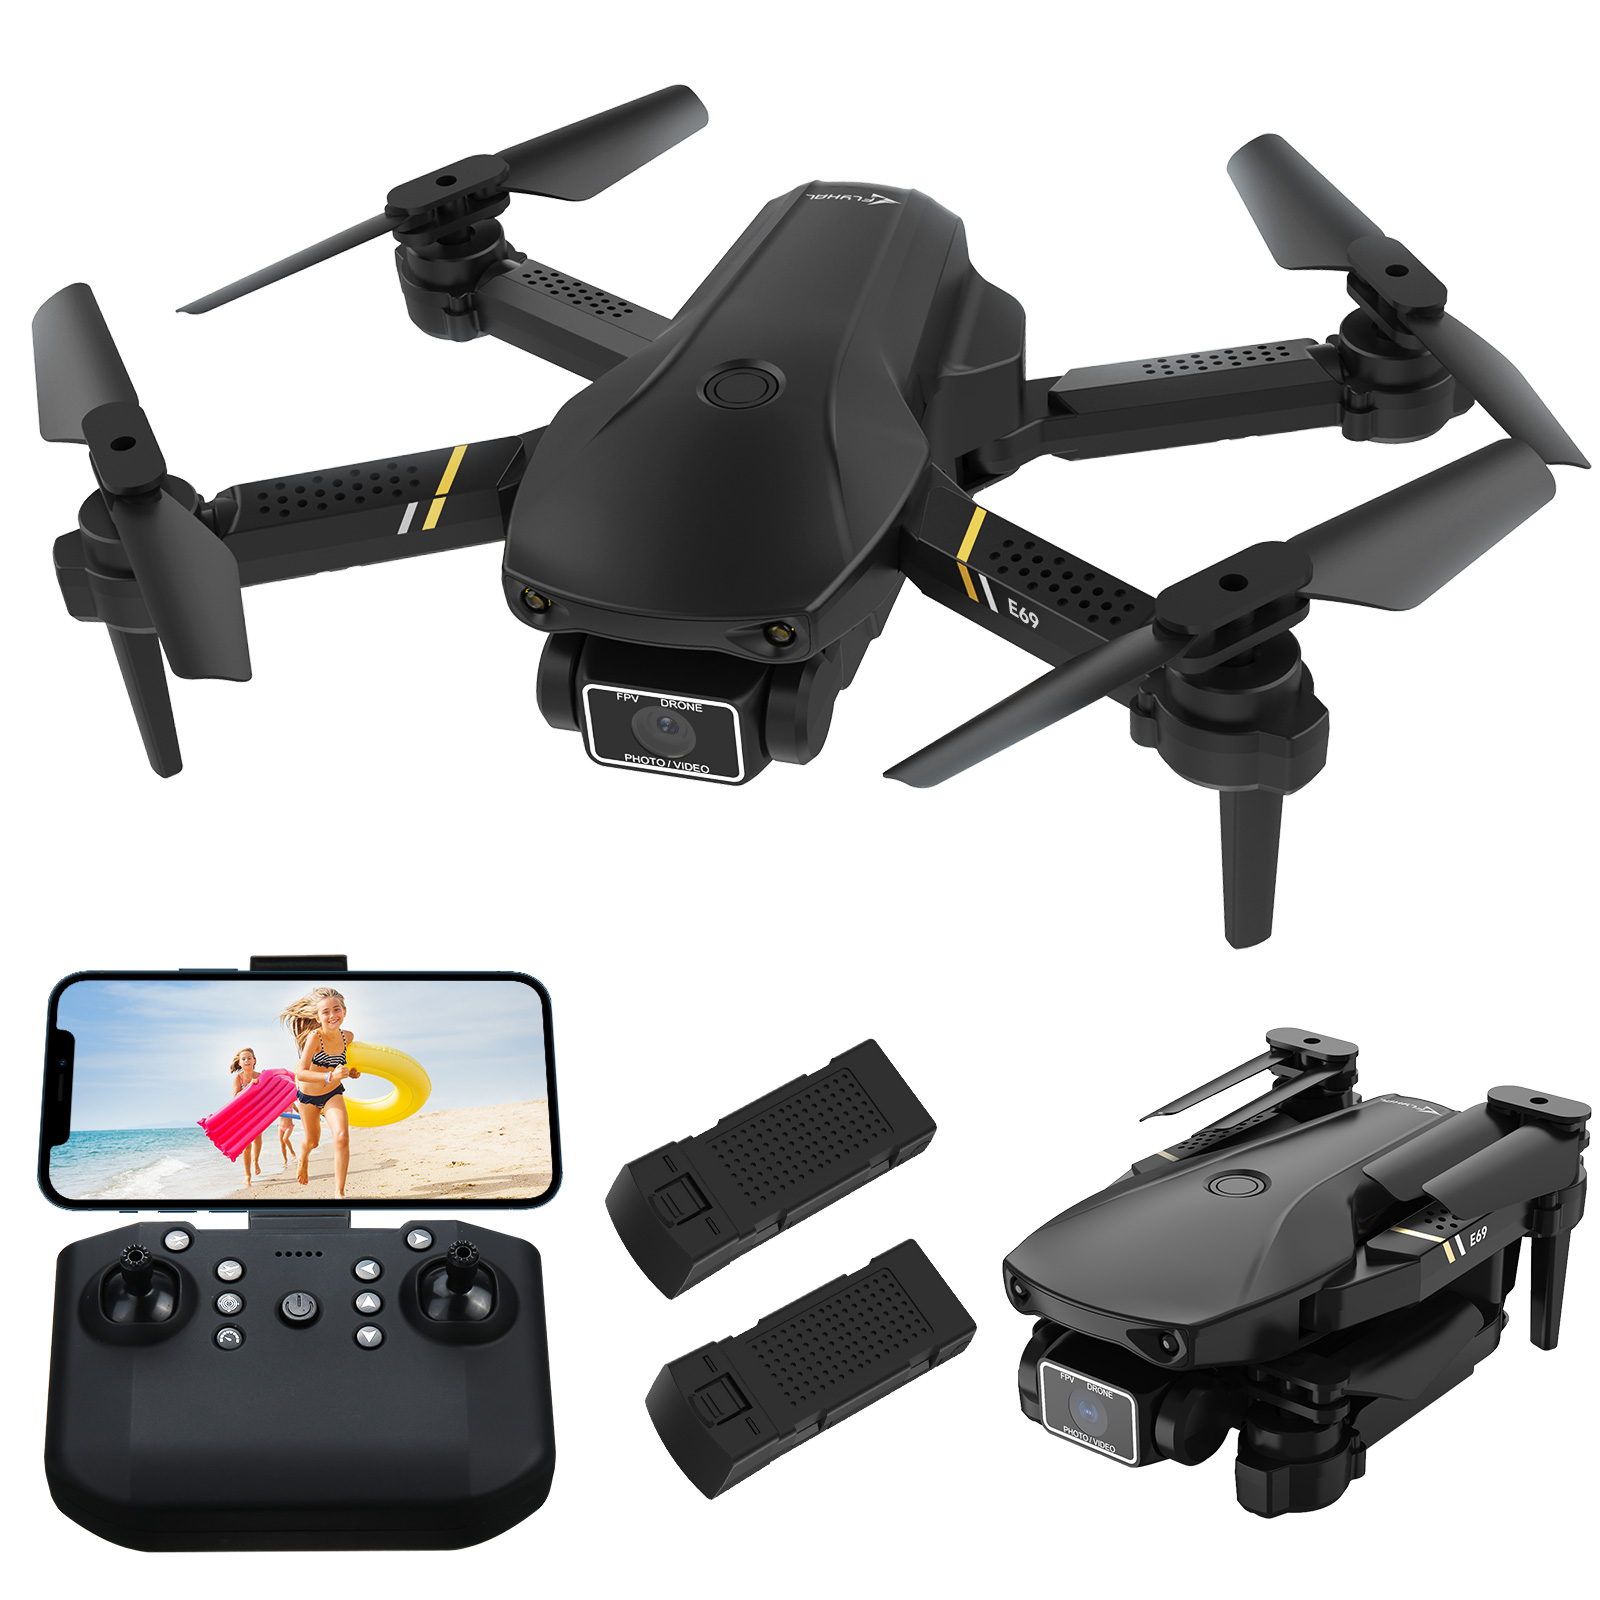 FLYHAL-E69-WIFI-FPV-With-1080P-HD-Wide-Angle-Camera-High-Hold-Mode-Foldable-RC-Drone-Quadcopter-RTF-1873920-1